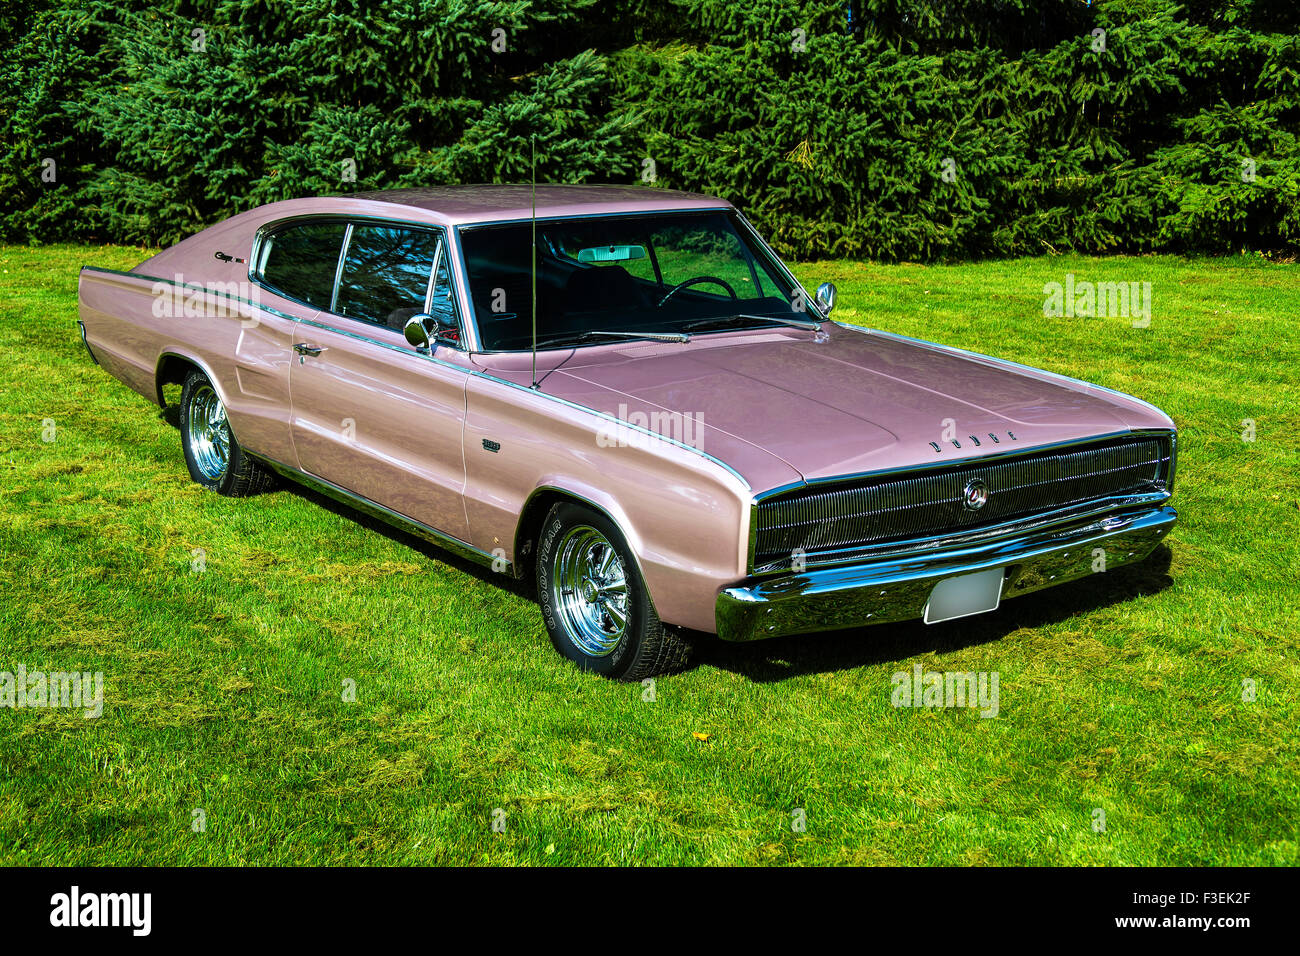 1966 Dodge Charger on grass Stock Photo